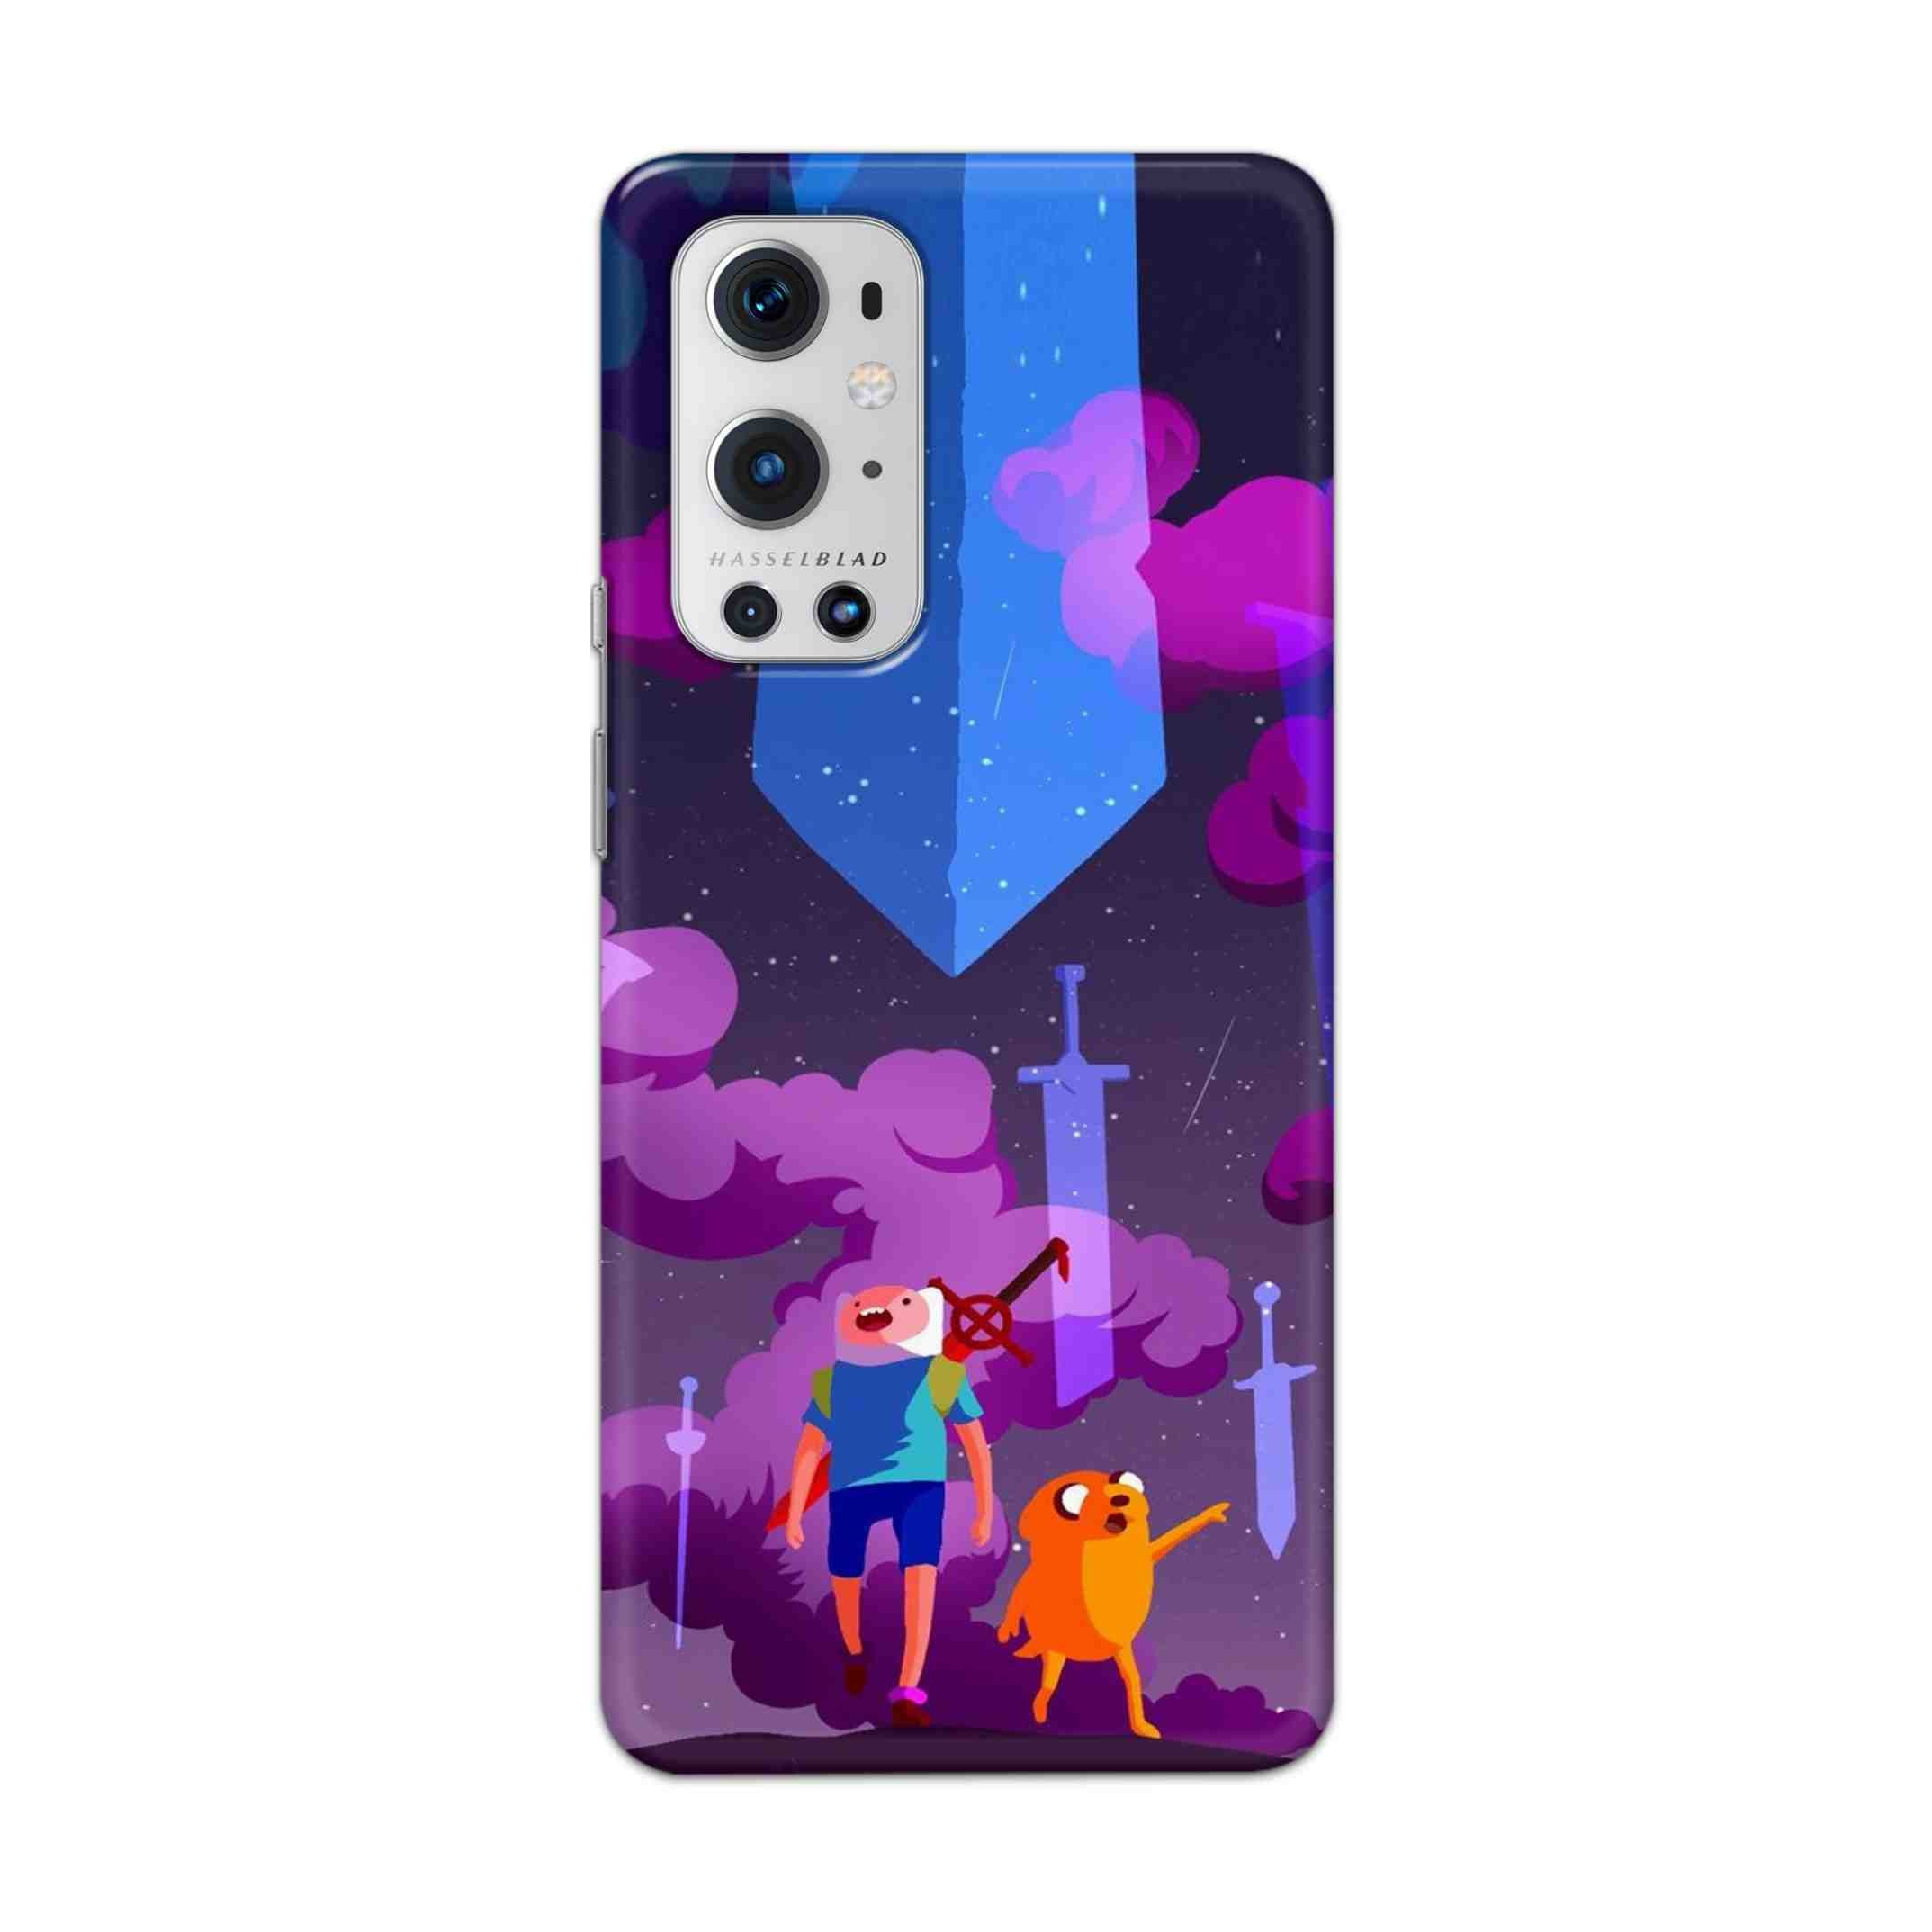 Buy Micky Cartoon Hard Back Mobile Phone Case Cover For OnePlus 9 Pro Online